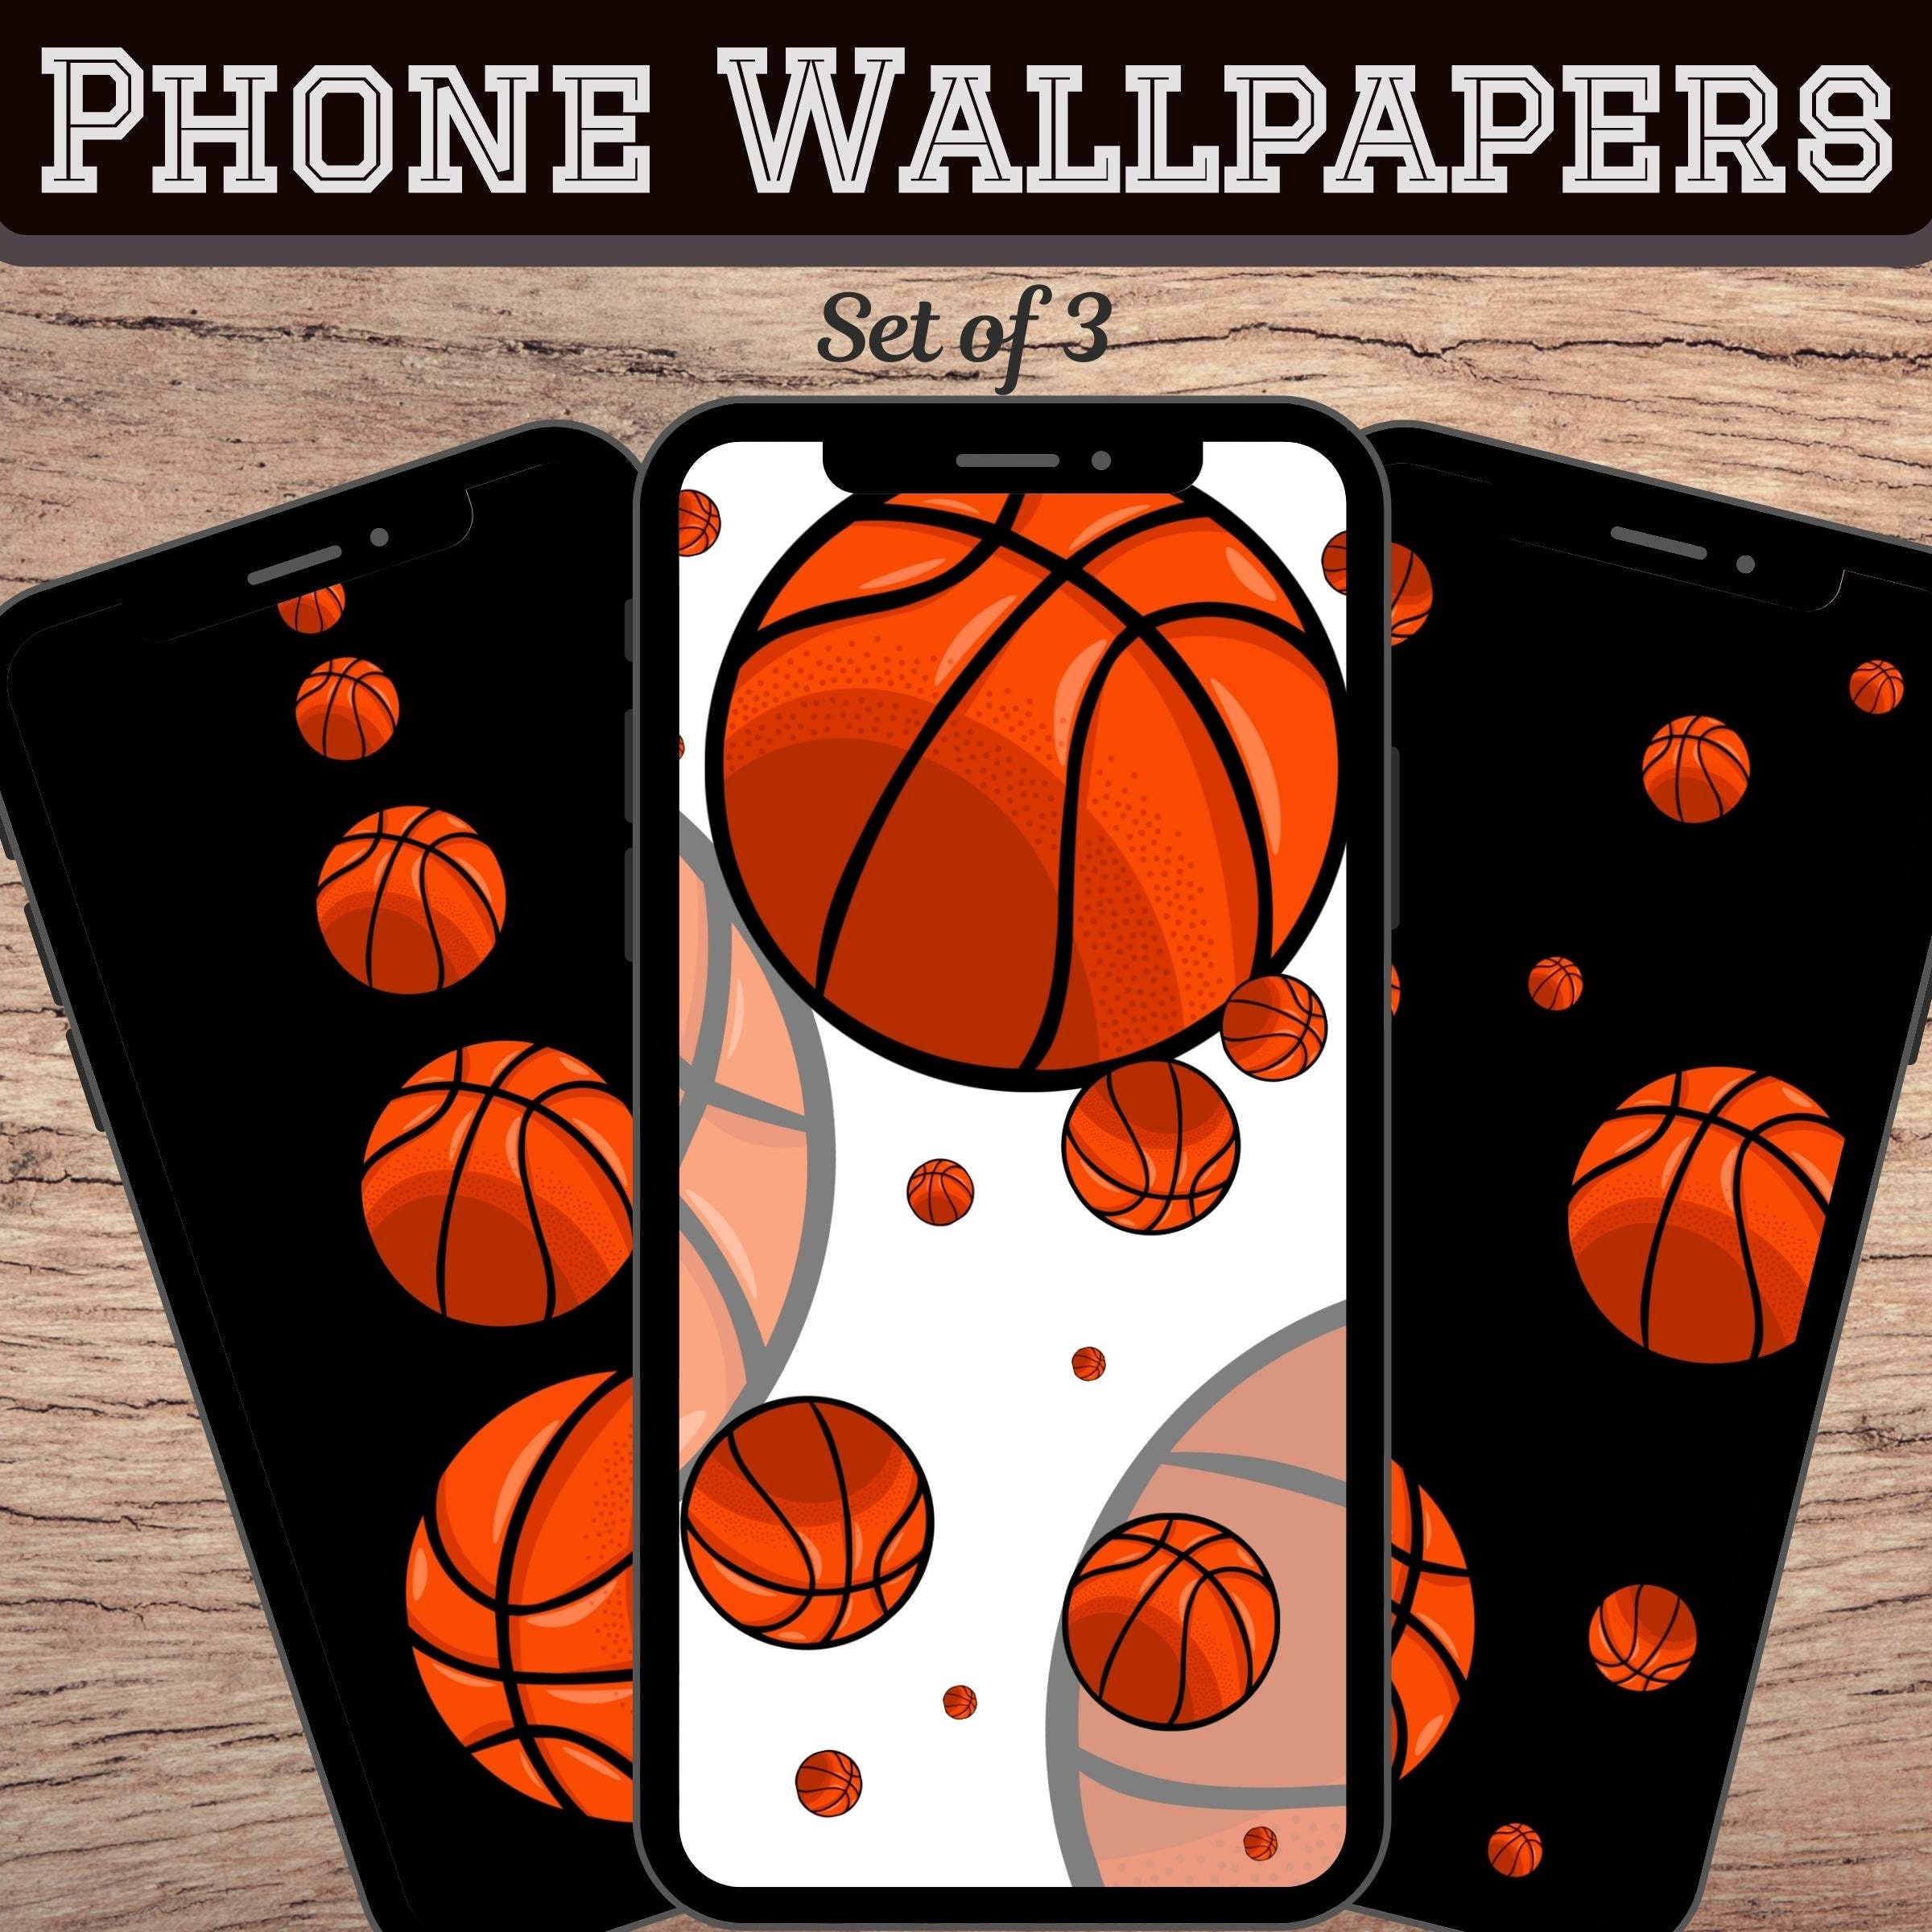 10 Cool basketball wallpapers for iPhone in 2023  iGeeksBlog